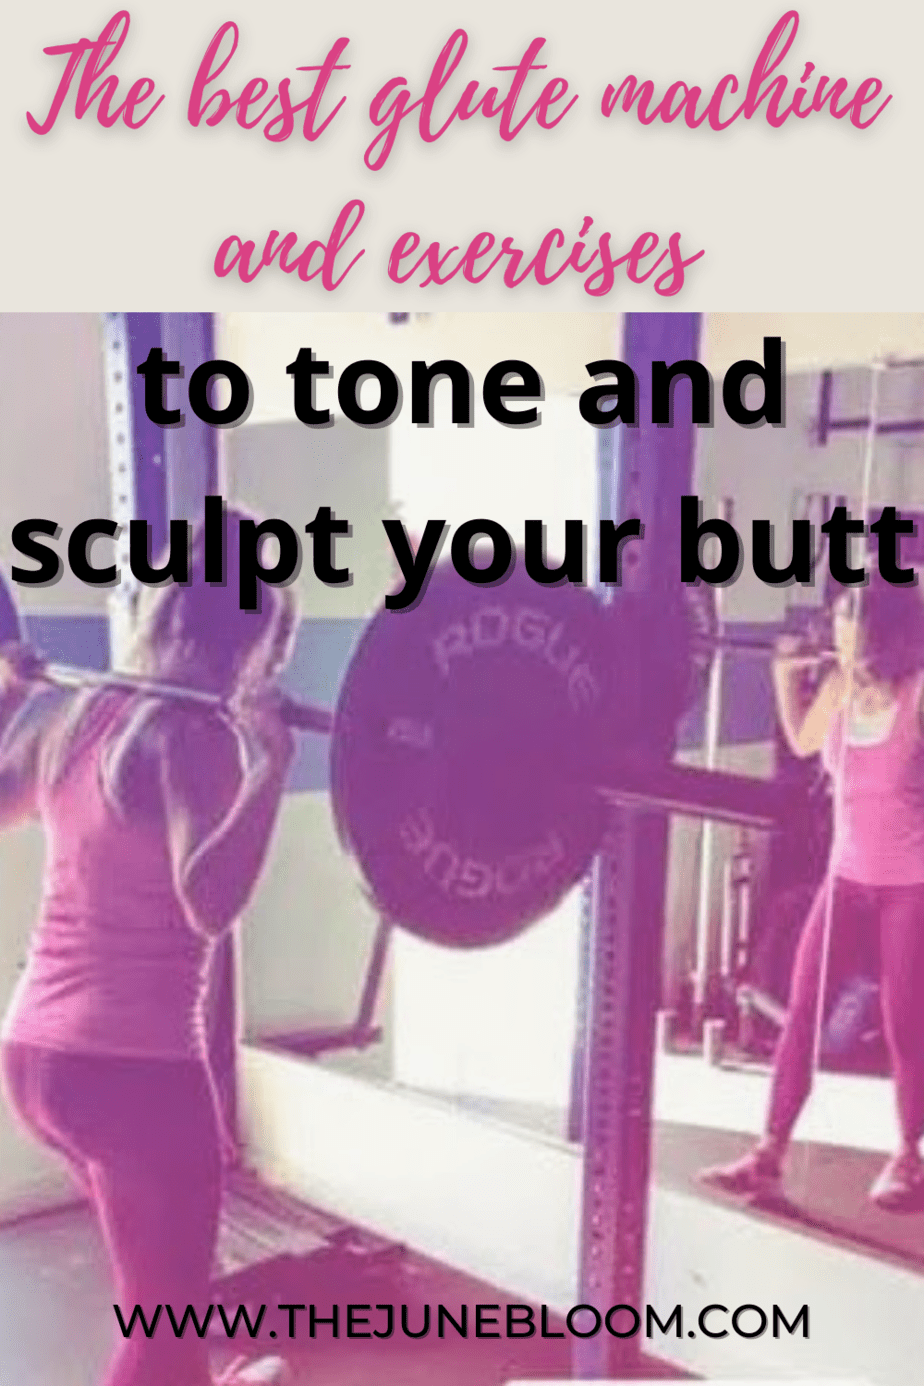 The best glute machine and exercises to tone and sculpt your butt